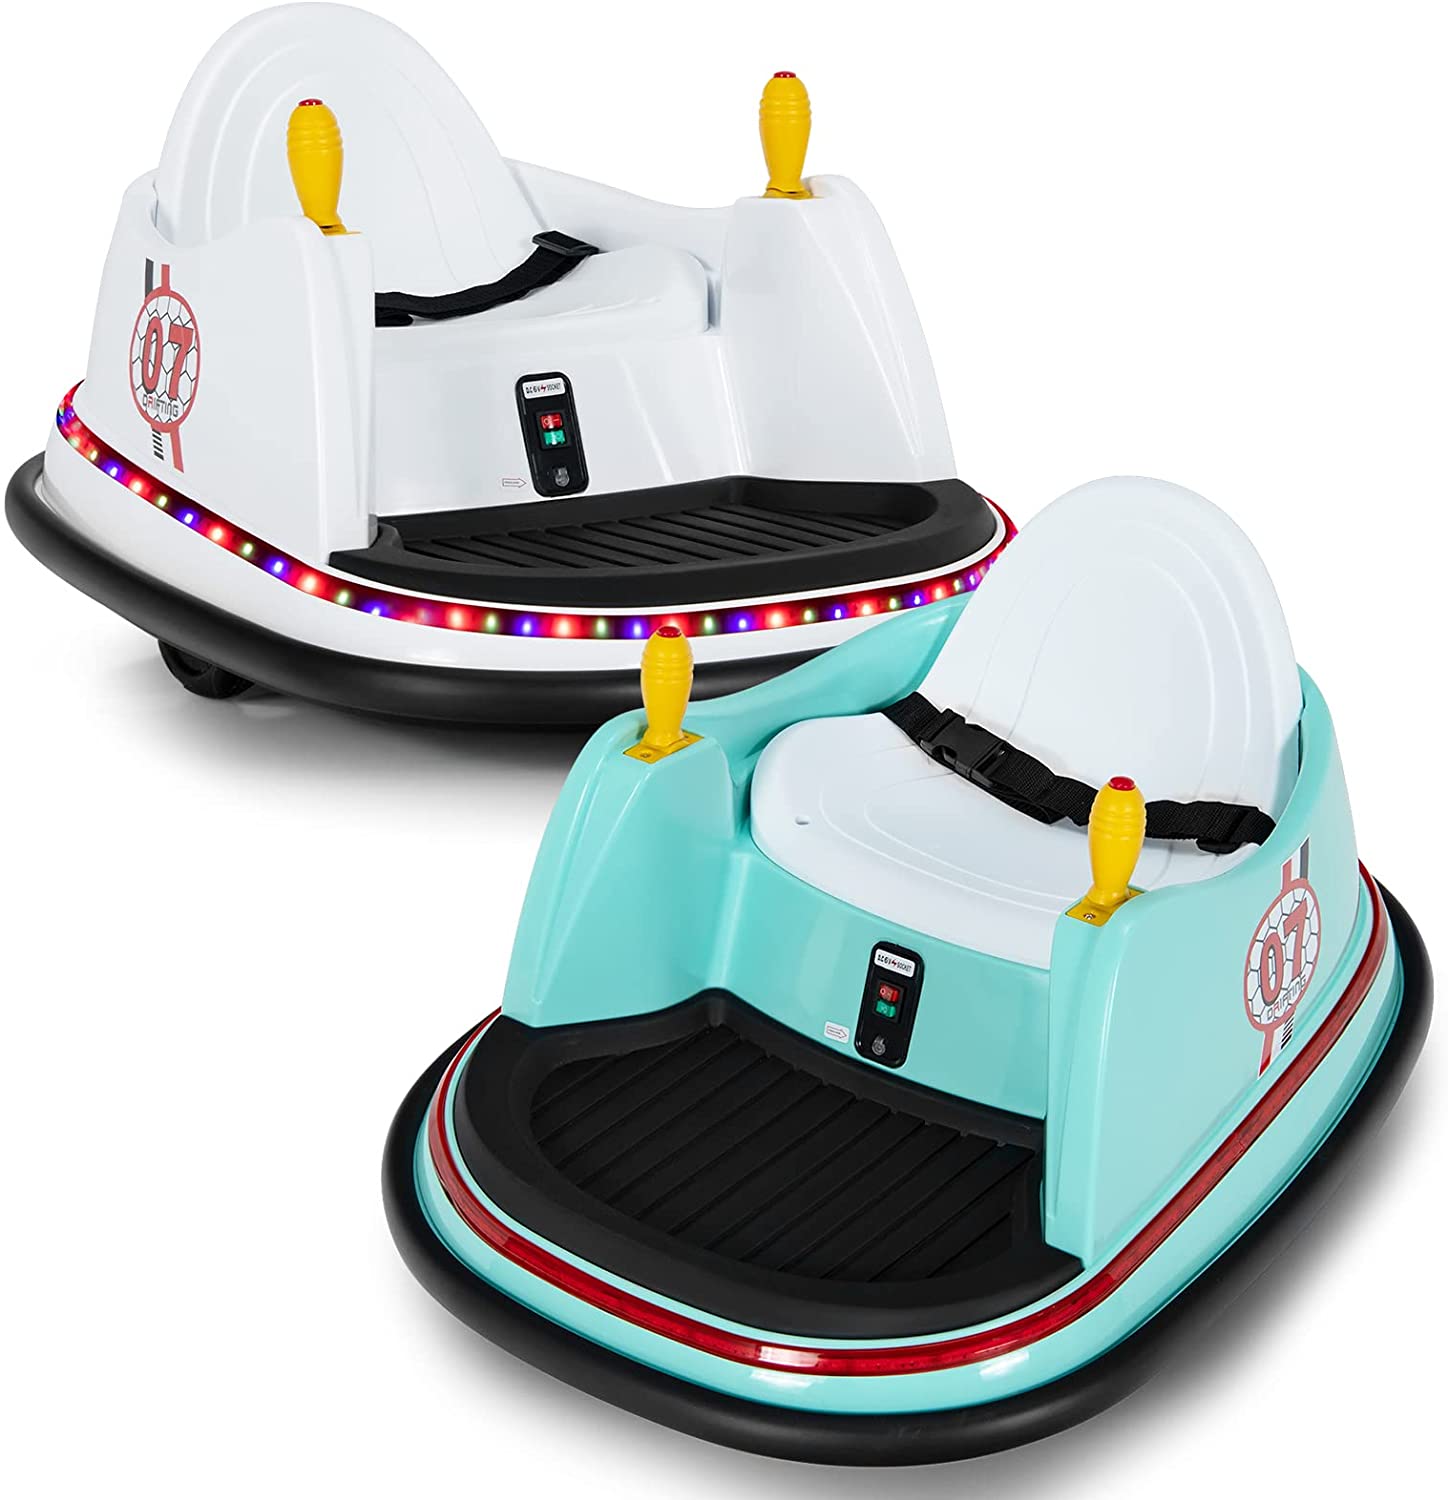 Bumper Car for Kids, 6V Battery Powered Electric Vehicle